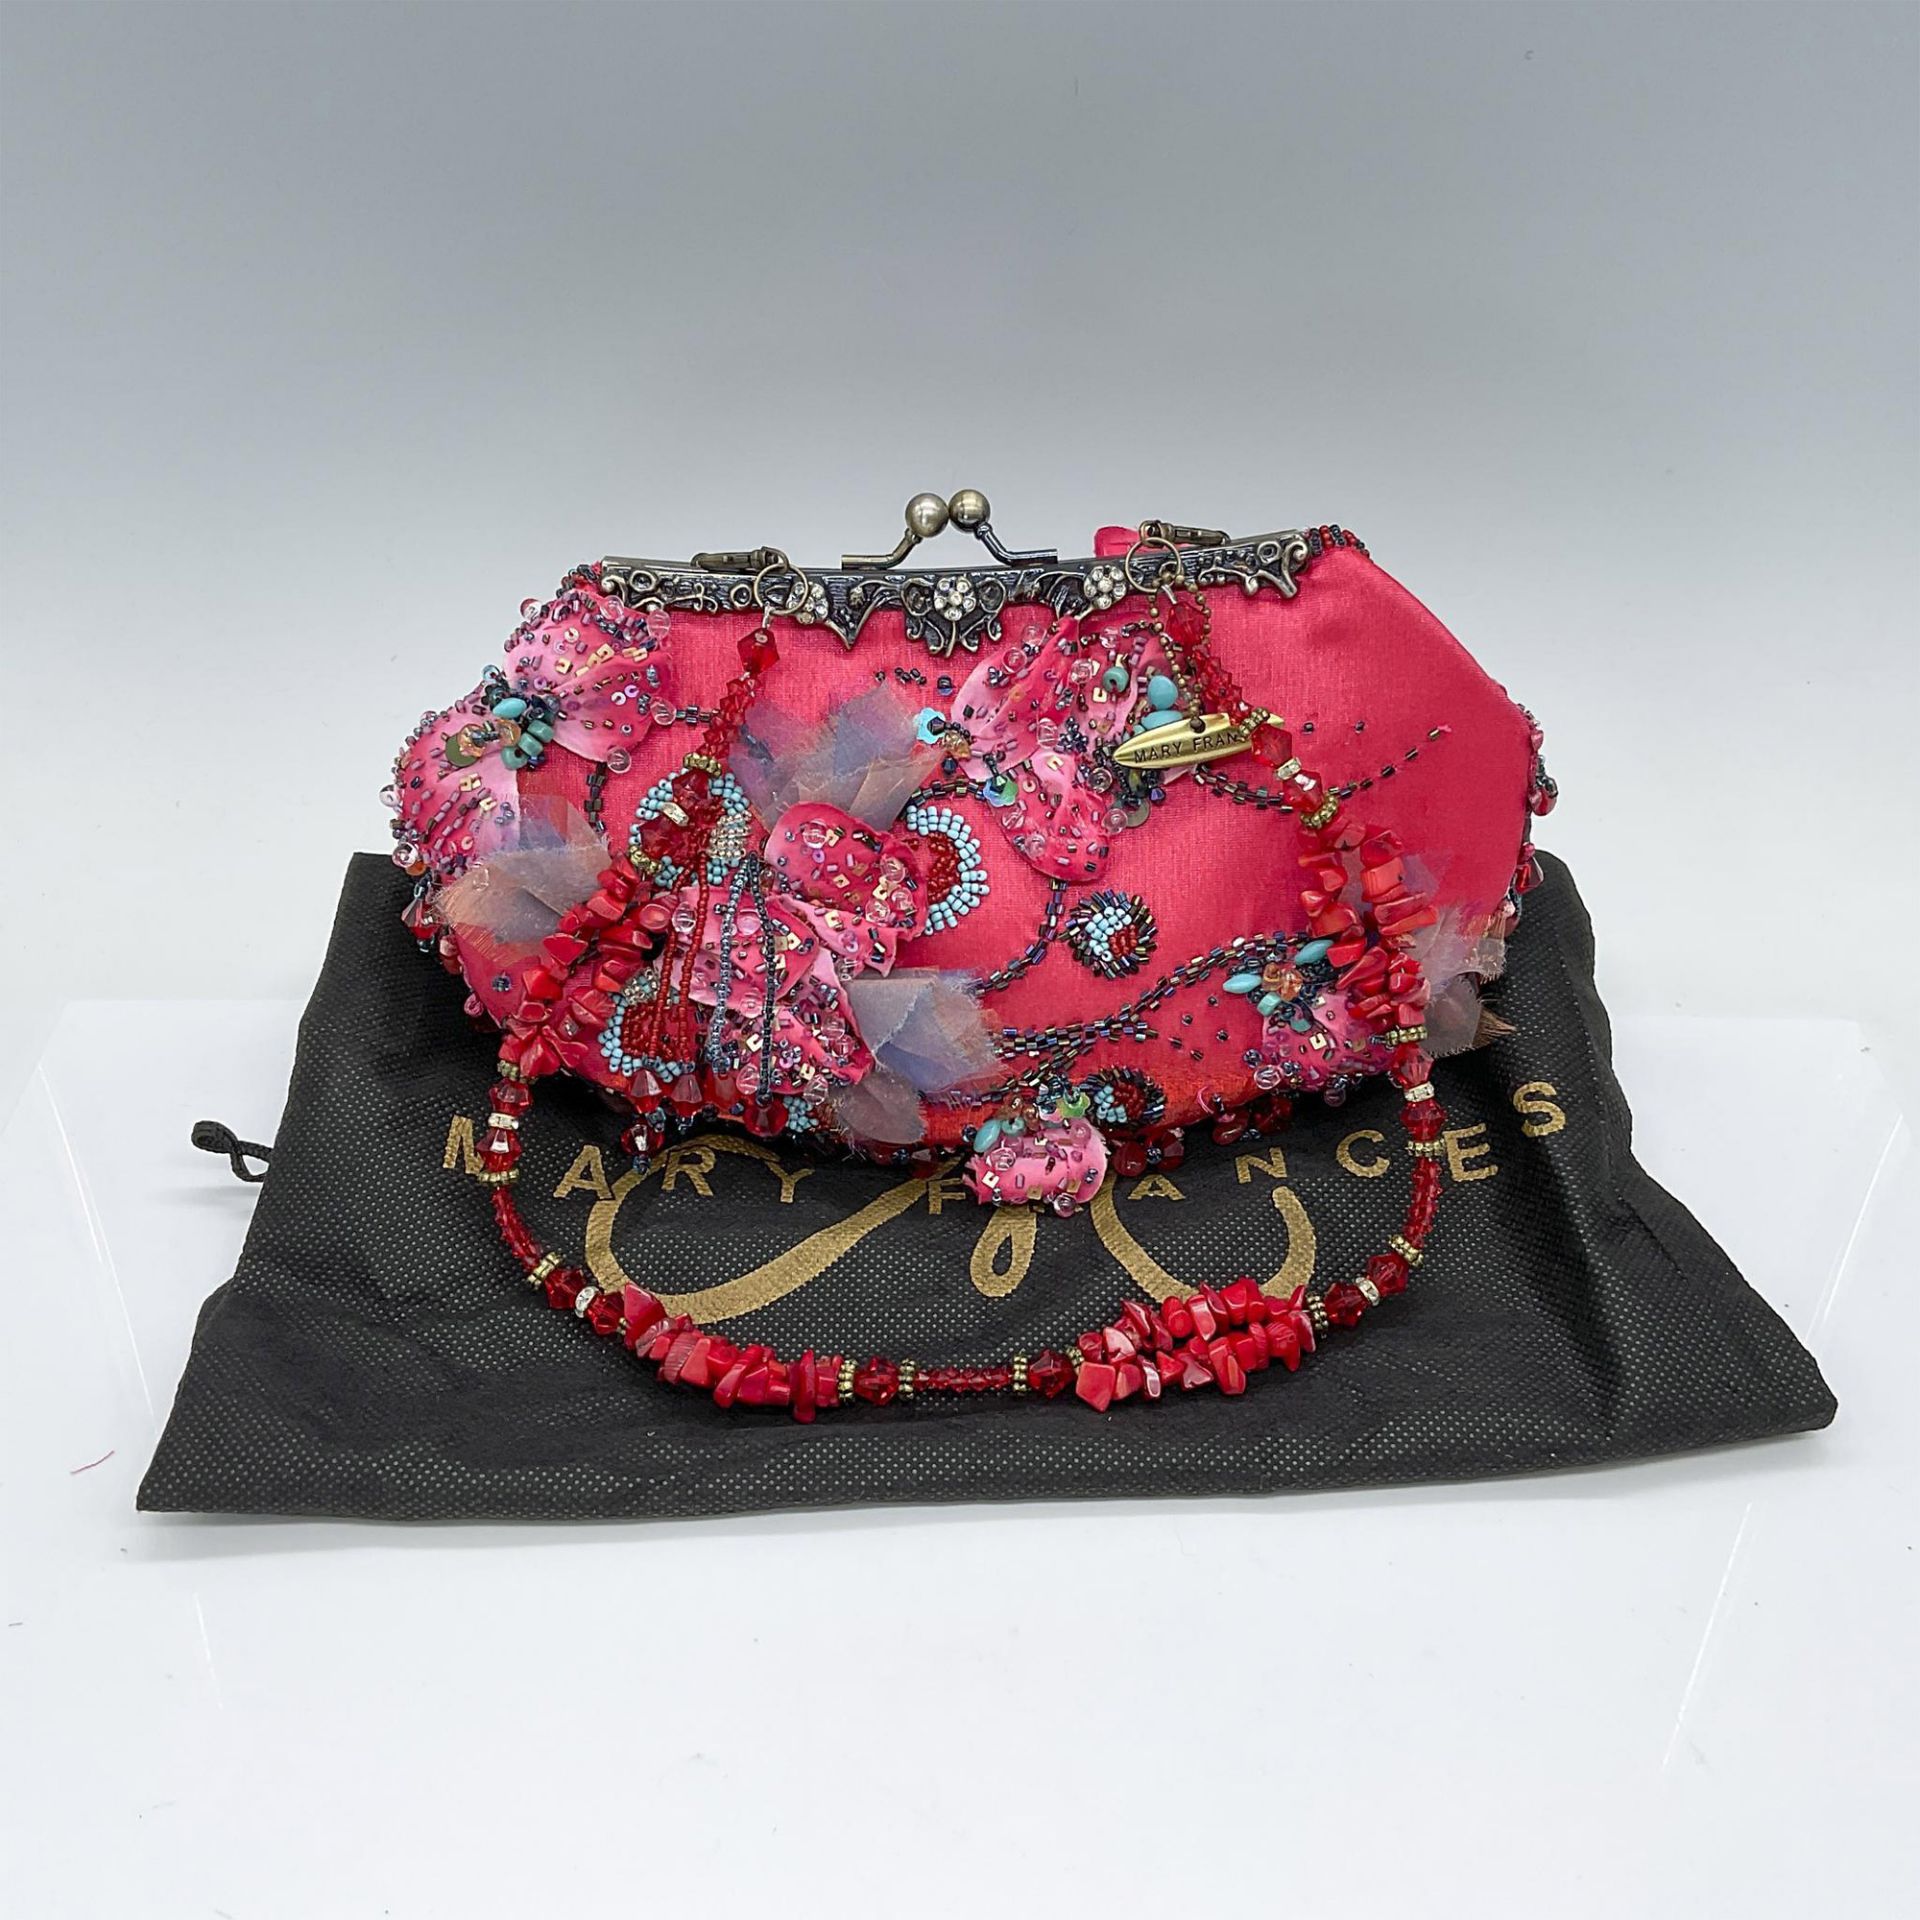 Mary Frances Purse, Flambe Pink Clutch/Short Shoulder - Image 3 of 3